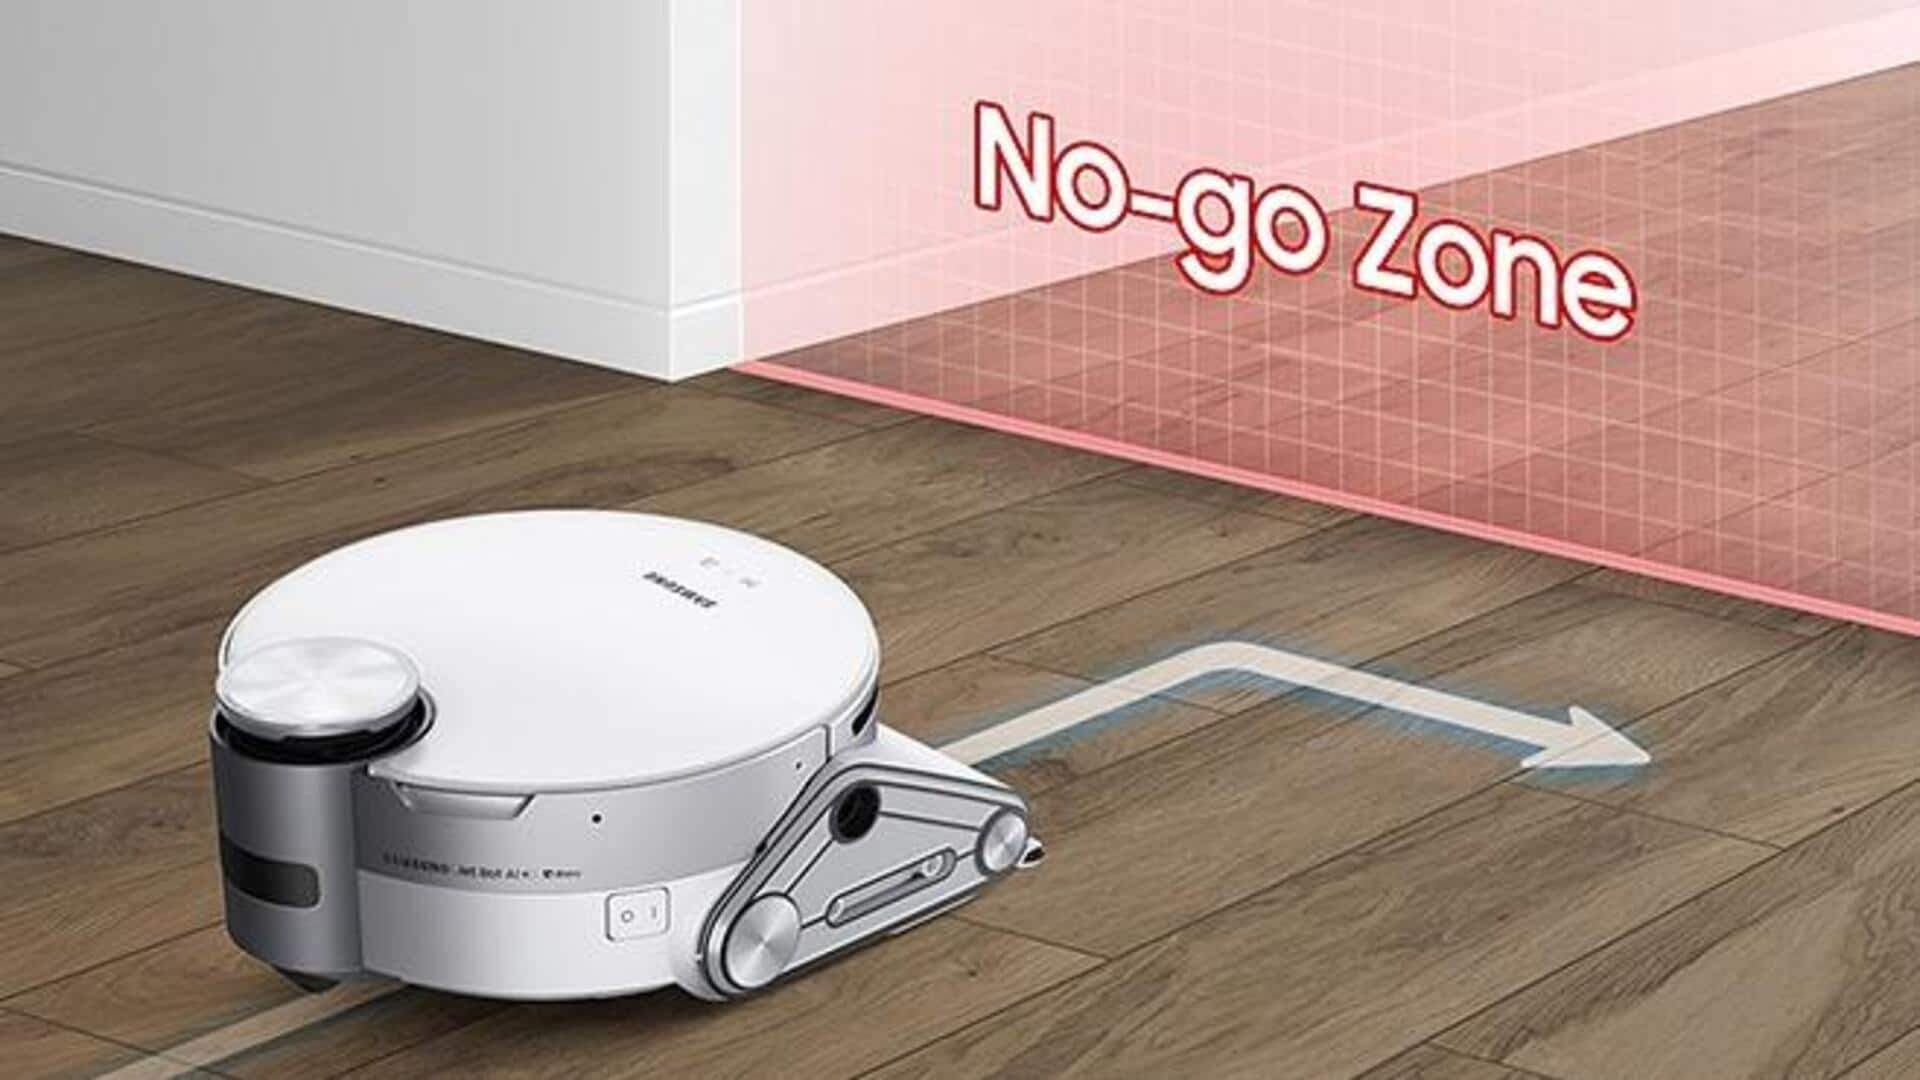 Everything to know about Samsung's new AI-powered robot vacuum cleaner